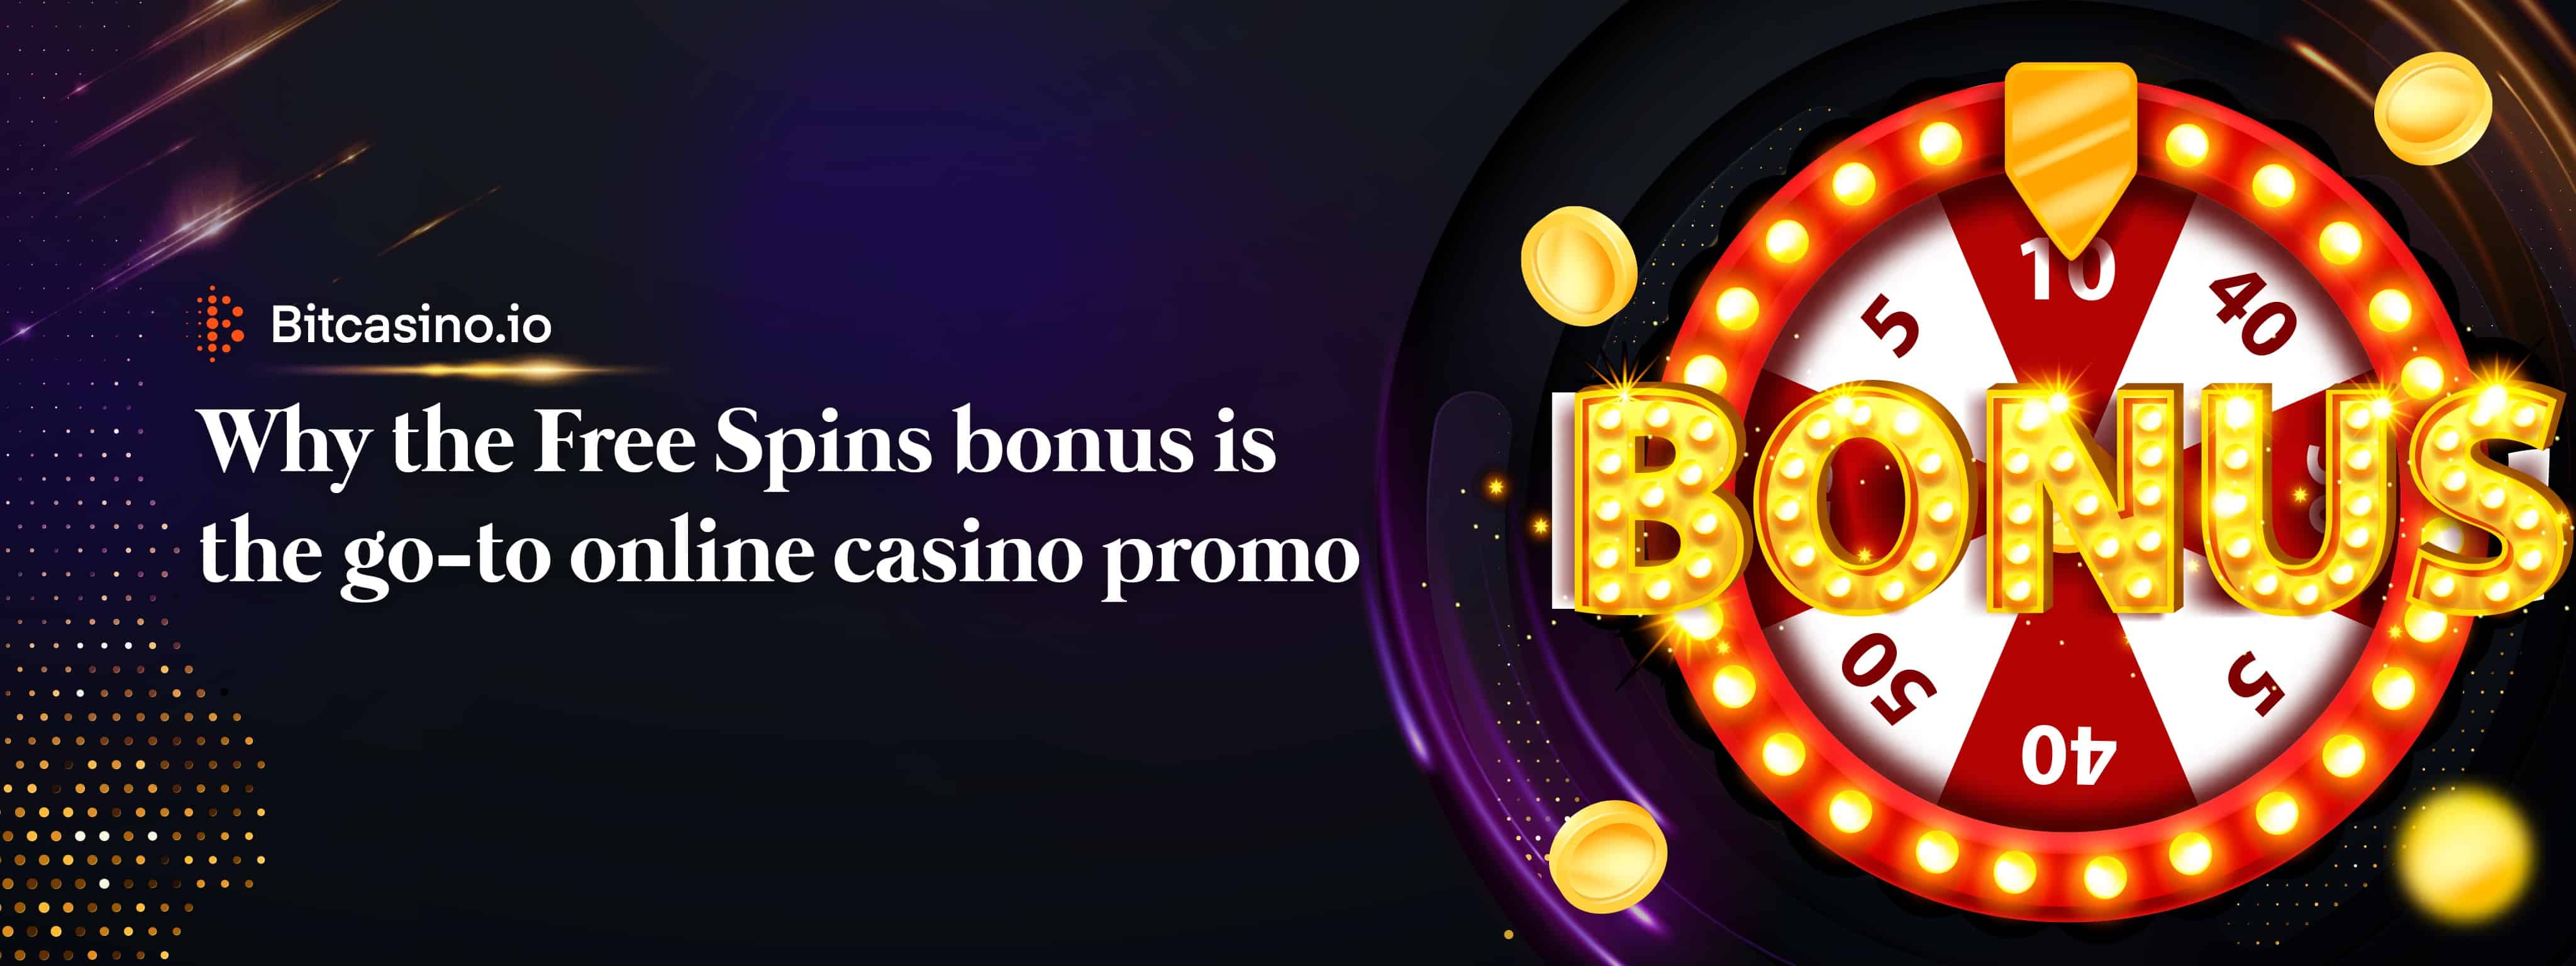 Why the Free Spins bonus is the go-to online casino promo - Blog